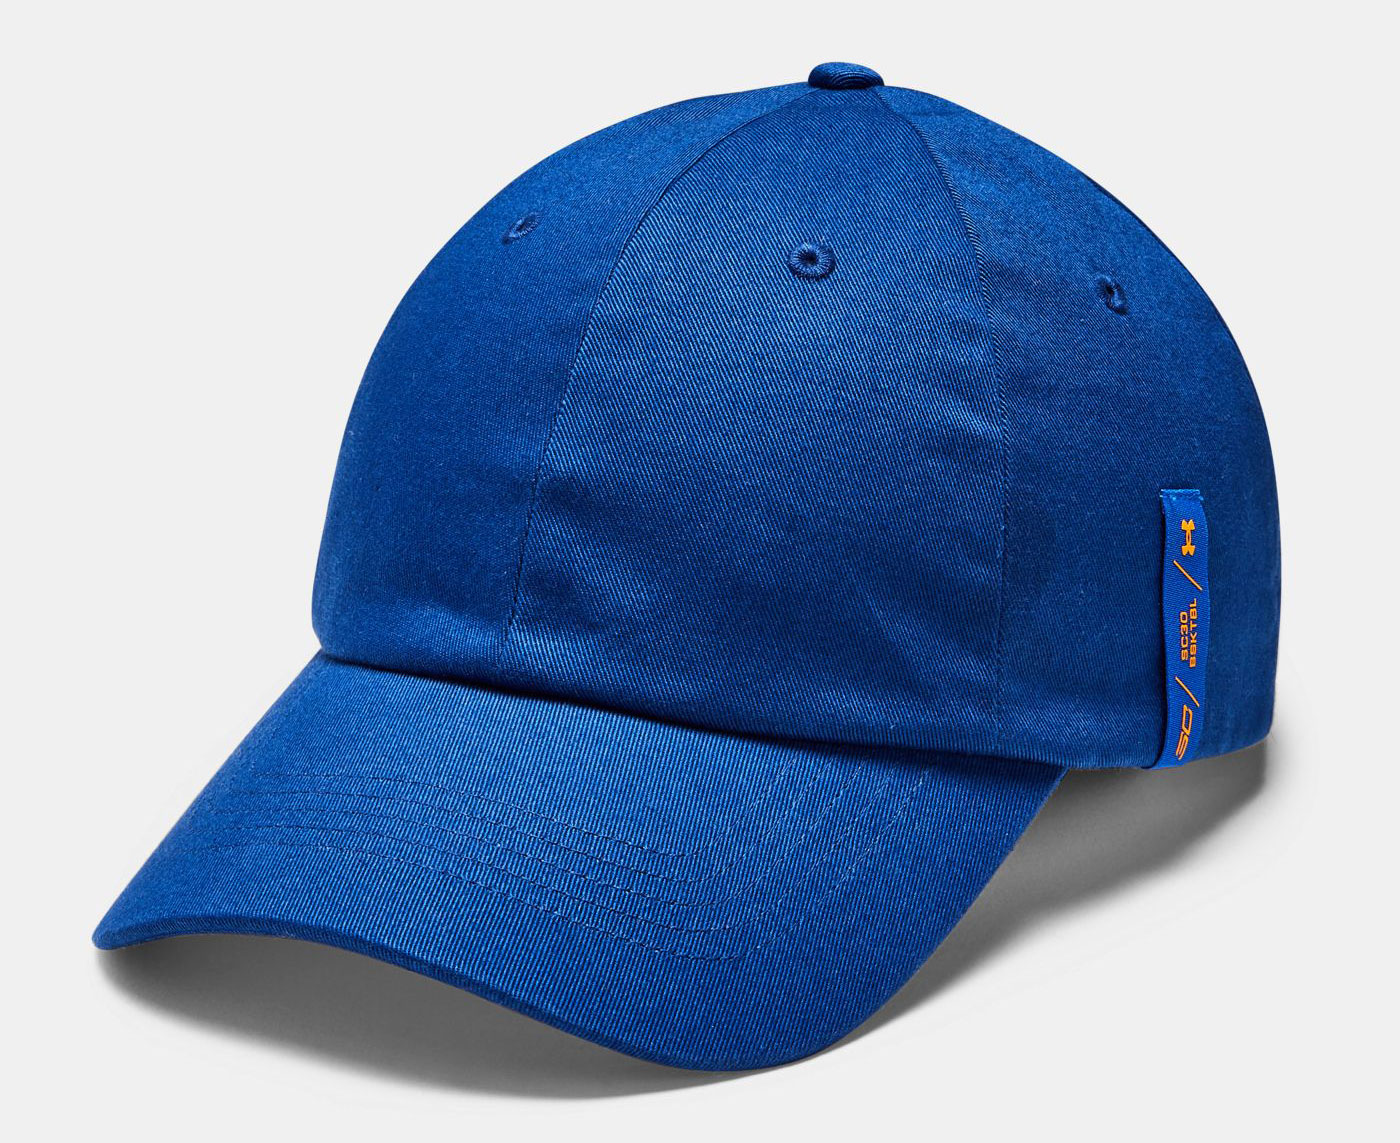 curry-7-hat-blue-1